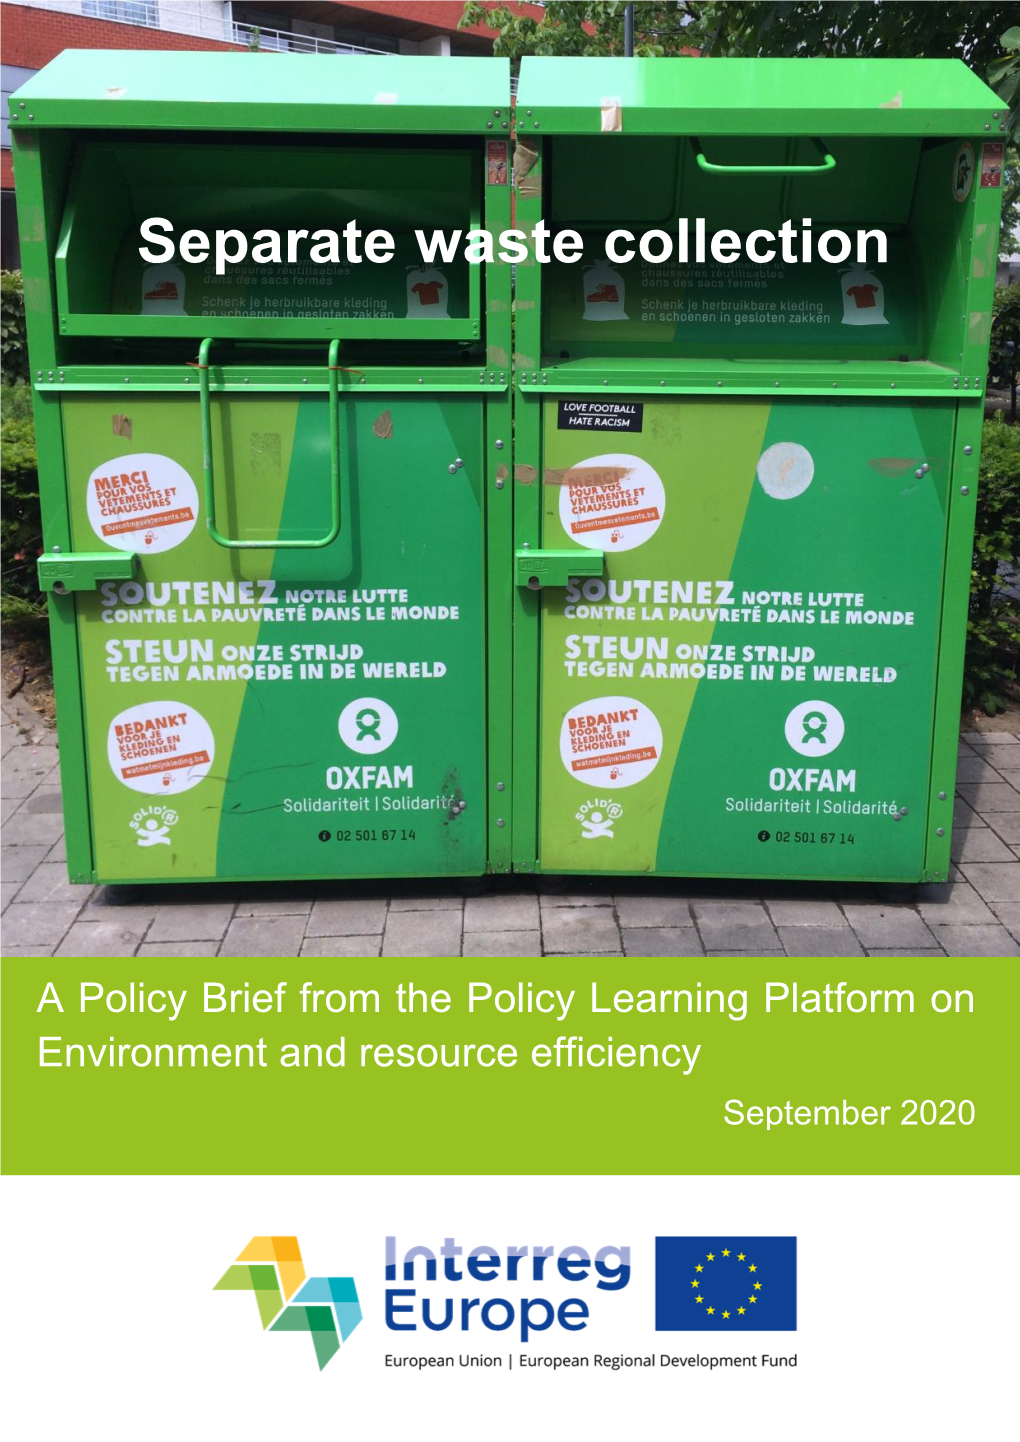 Separate Waste Collection Waste Collection and Special Waste Fractions Circular Economy